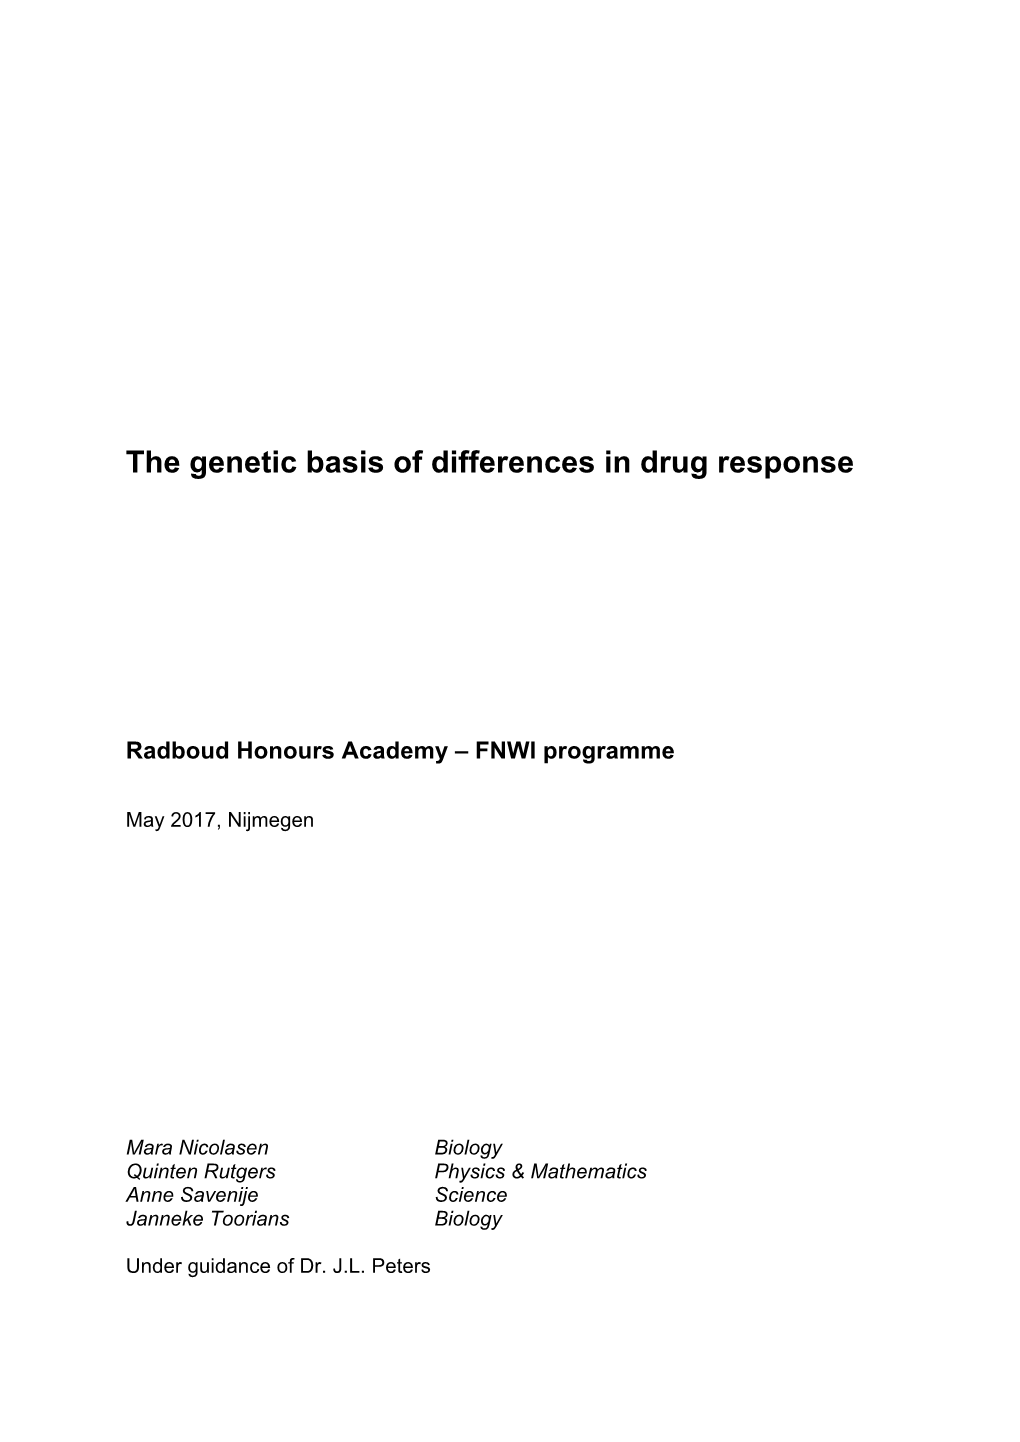 The Genetic Basis of Differences in Drug Response